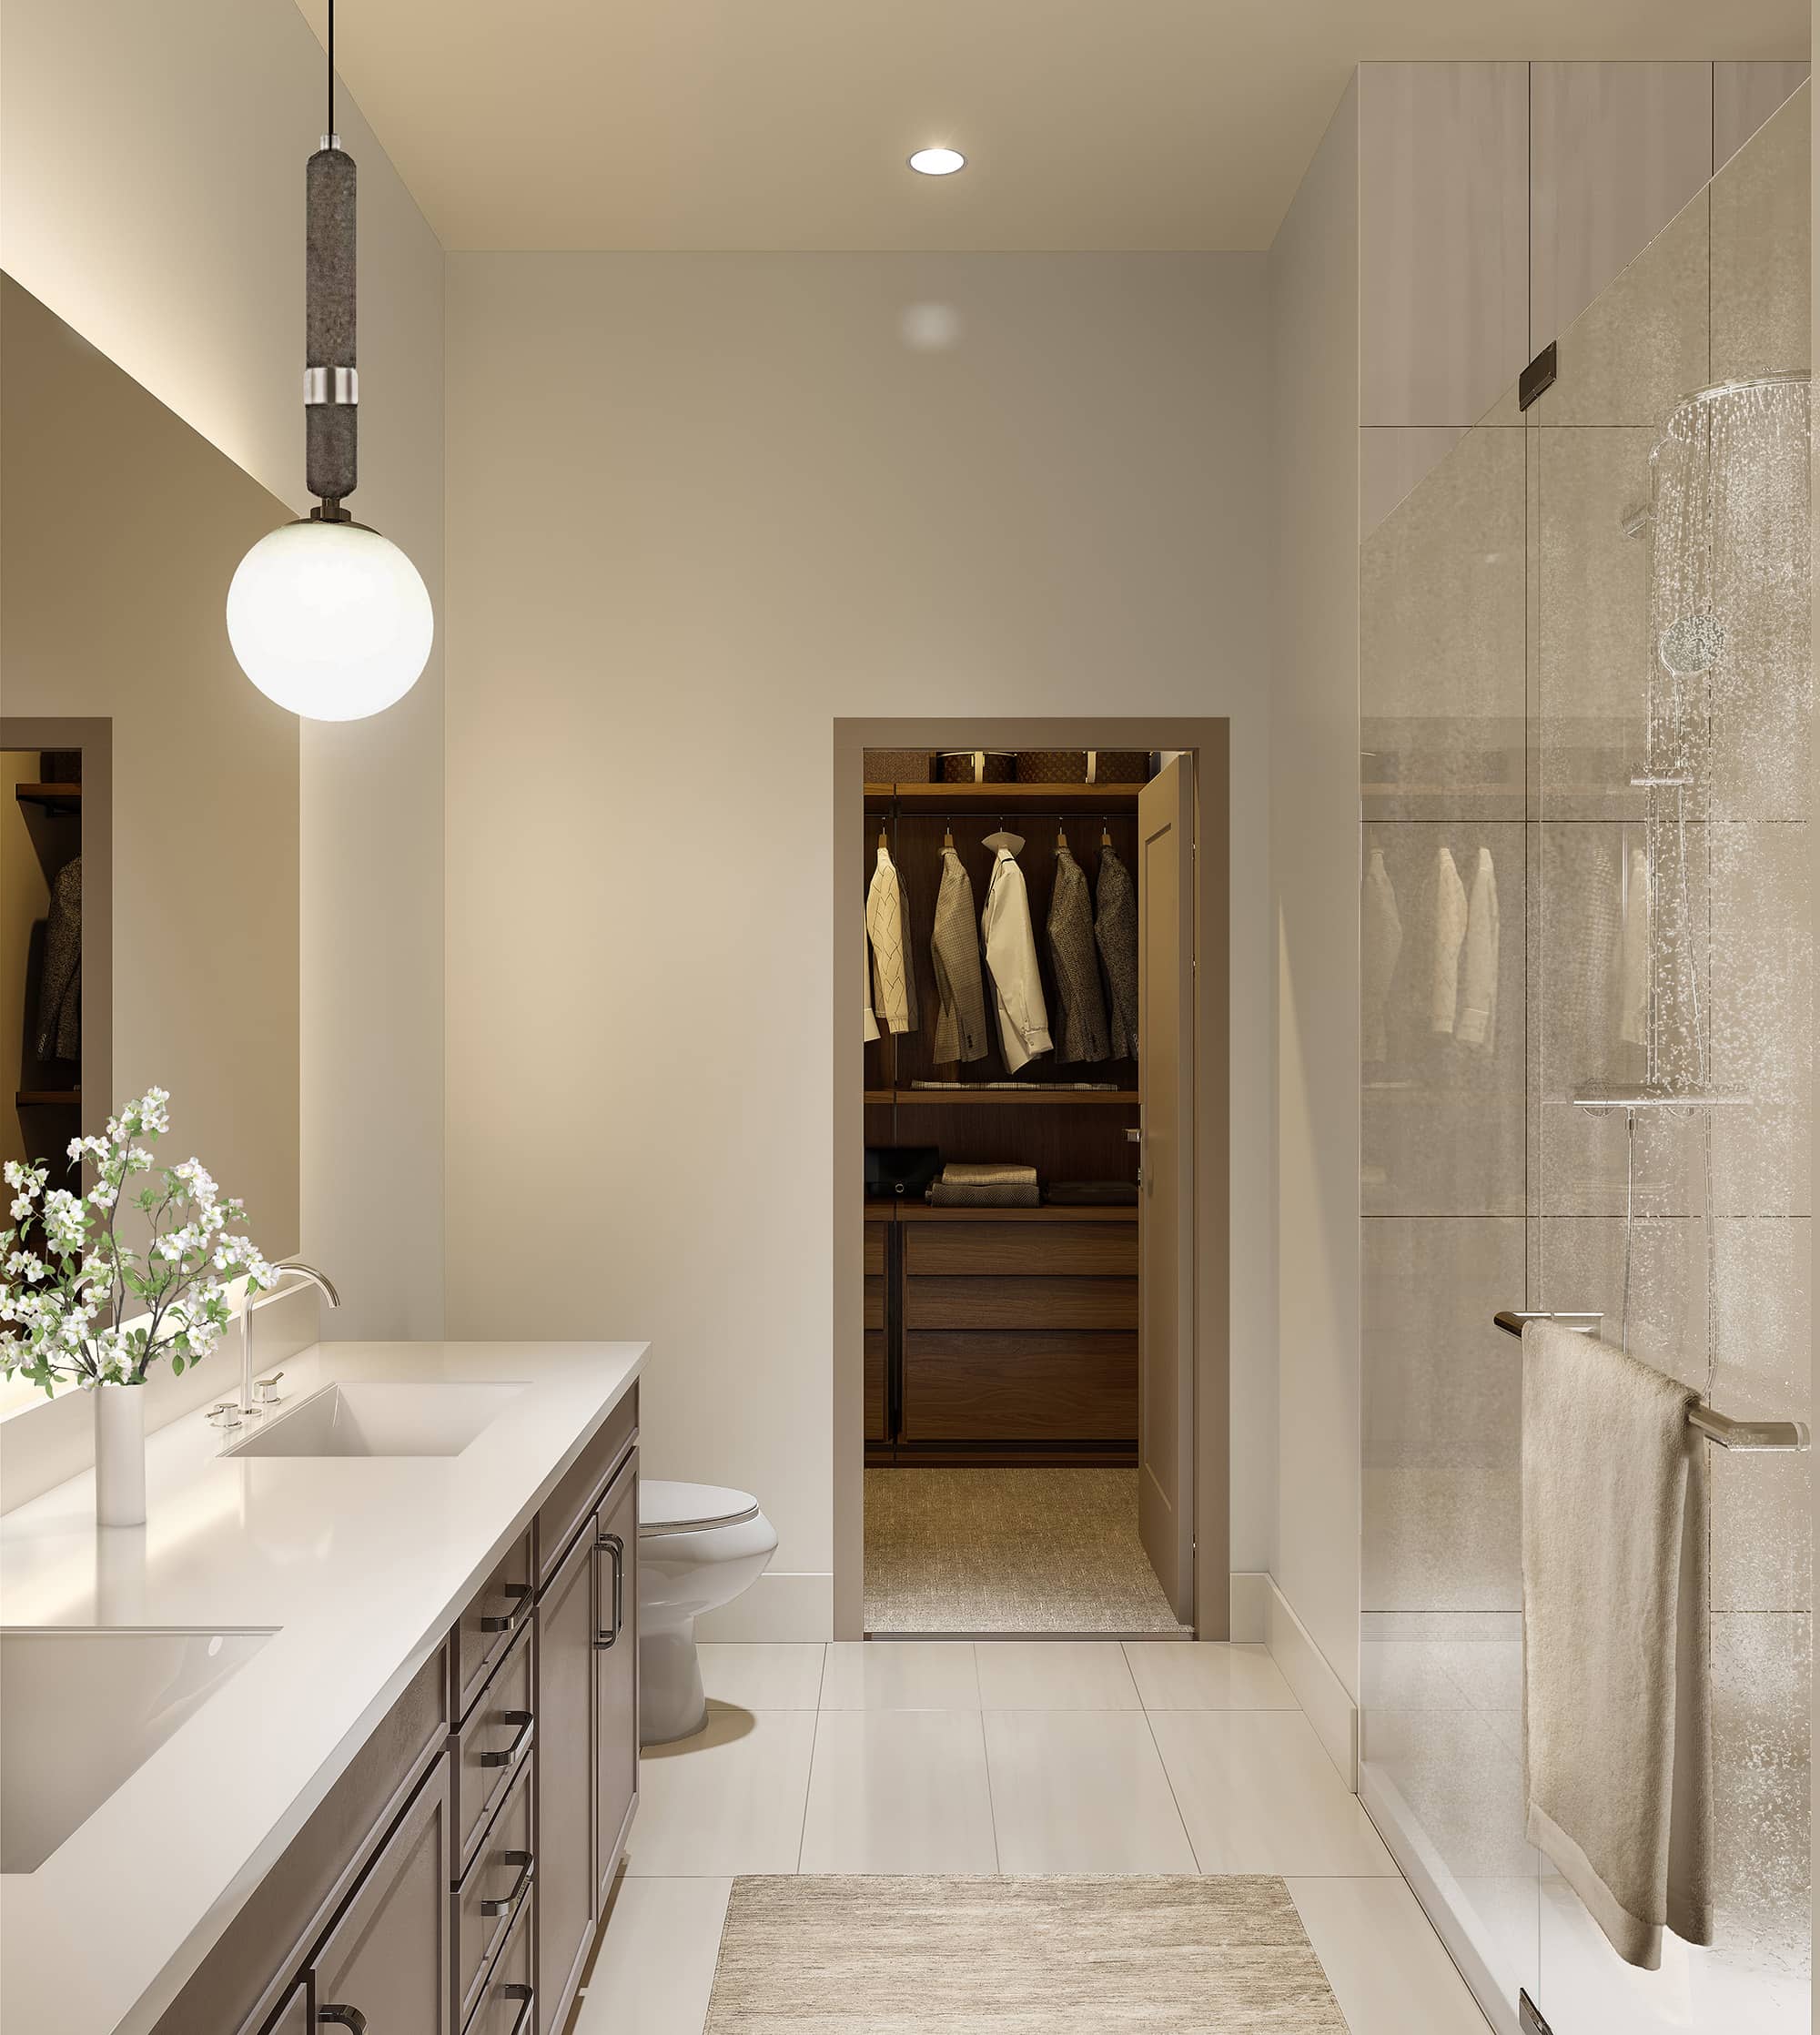 Luxury Apartments in Austin for Rent - Jovie Belterra - Spa-Style Bathroom with Double Vanity, Glass Shower Door, and Walk-In Closet